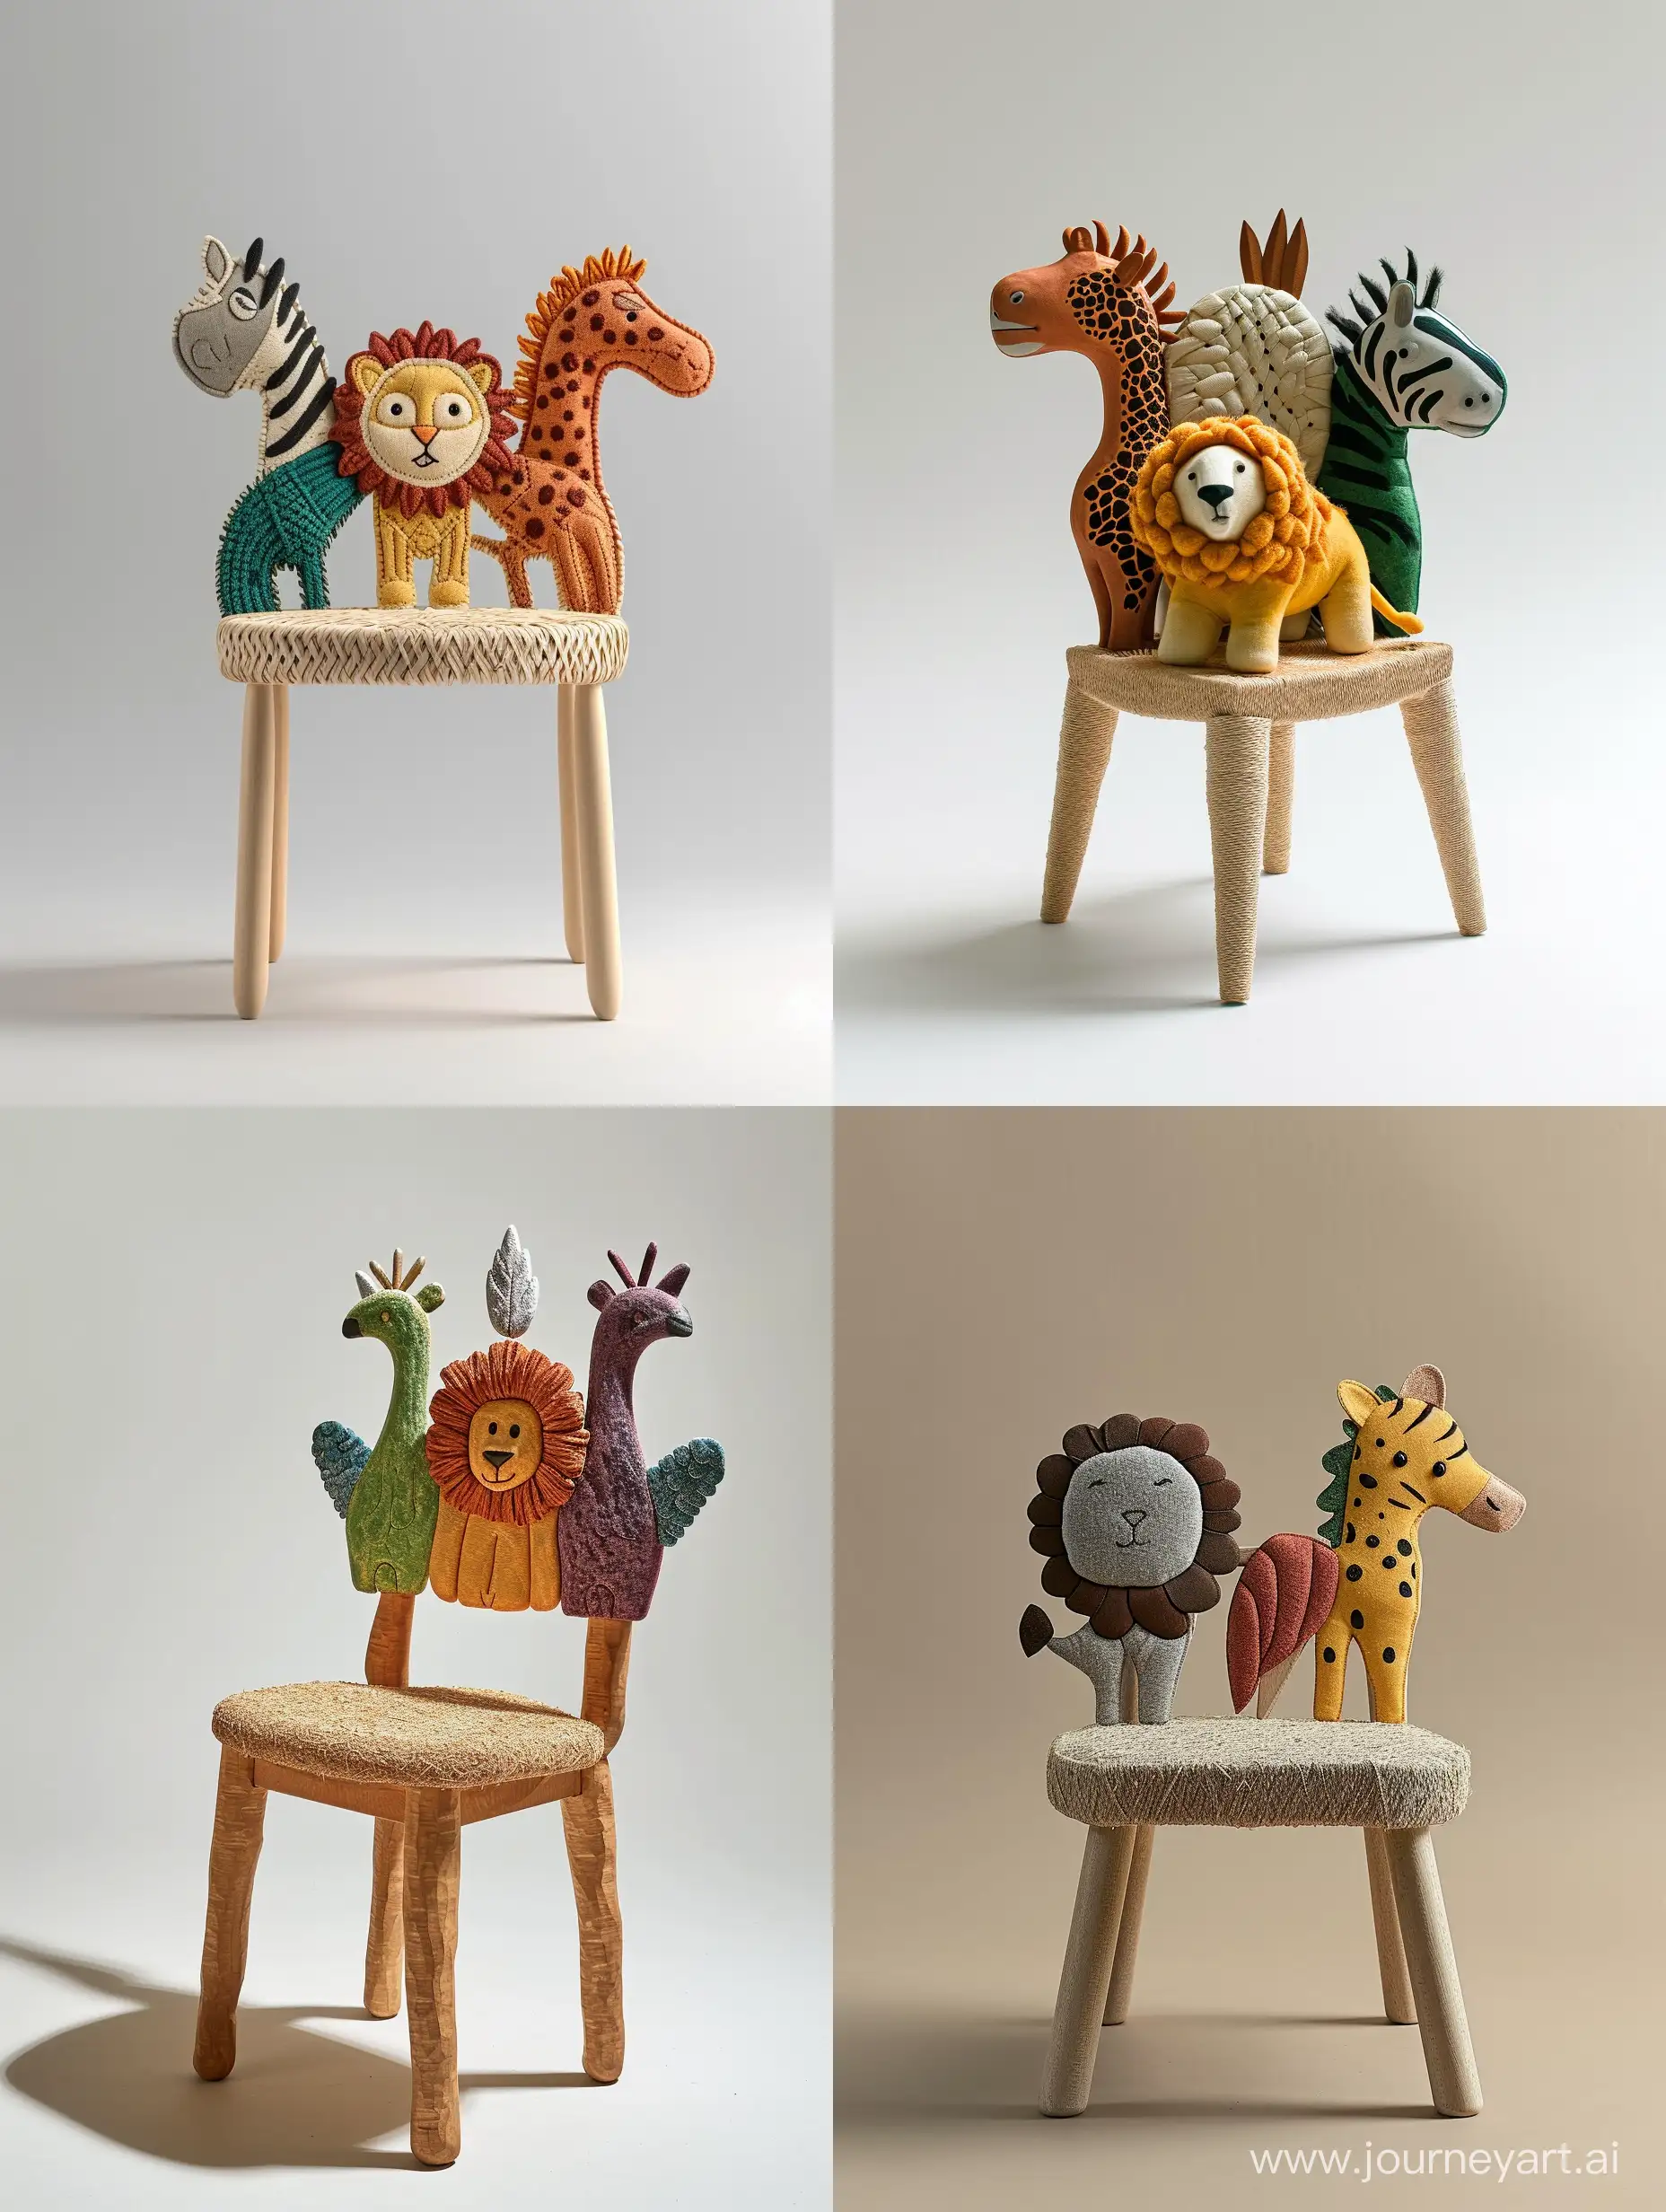 imagine an image of a minimal sturdy children’s chair inspired by Children's drawing of cute safari animals like cute lion or zebra or griffin or cheetah or hippocampus  , with backrests shaped like different creatures. Use recycled wood for the frame and woven plant fibers for seating areas, depicted in colors representative of the chosen animals. The seat should stand approximately 30cm tall, built to educate about wildlife and ensure durability.unreal ,realistic style